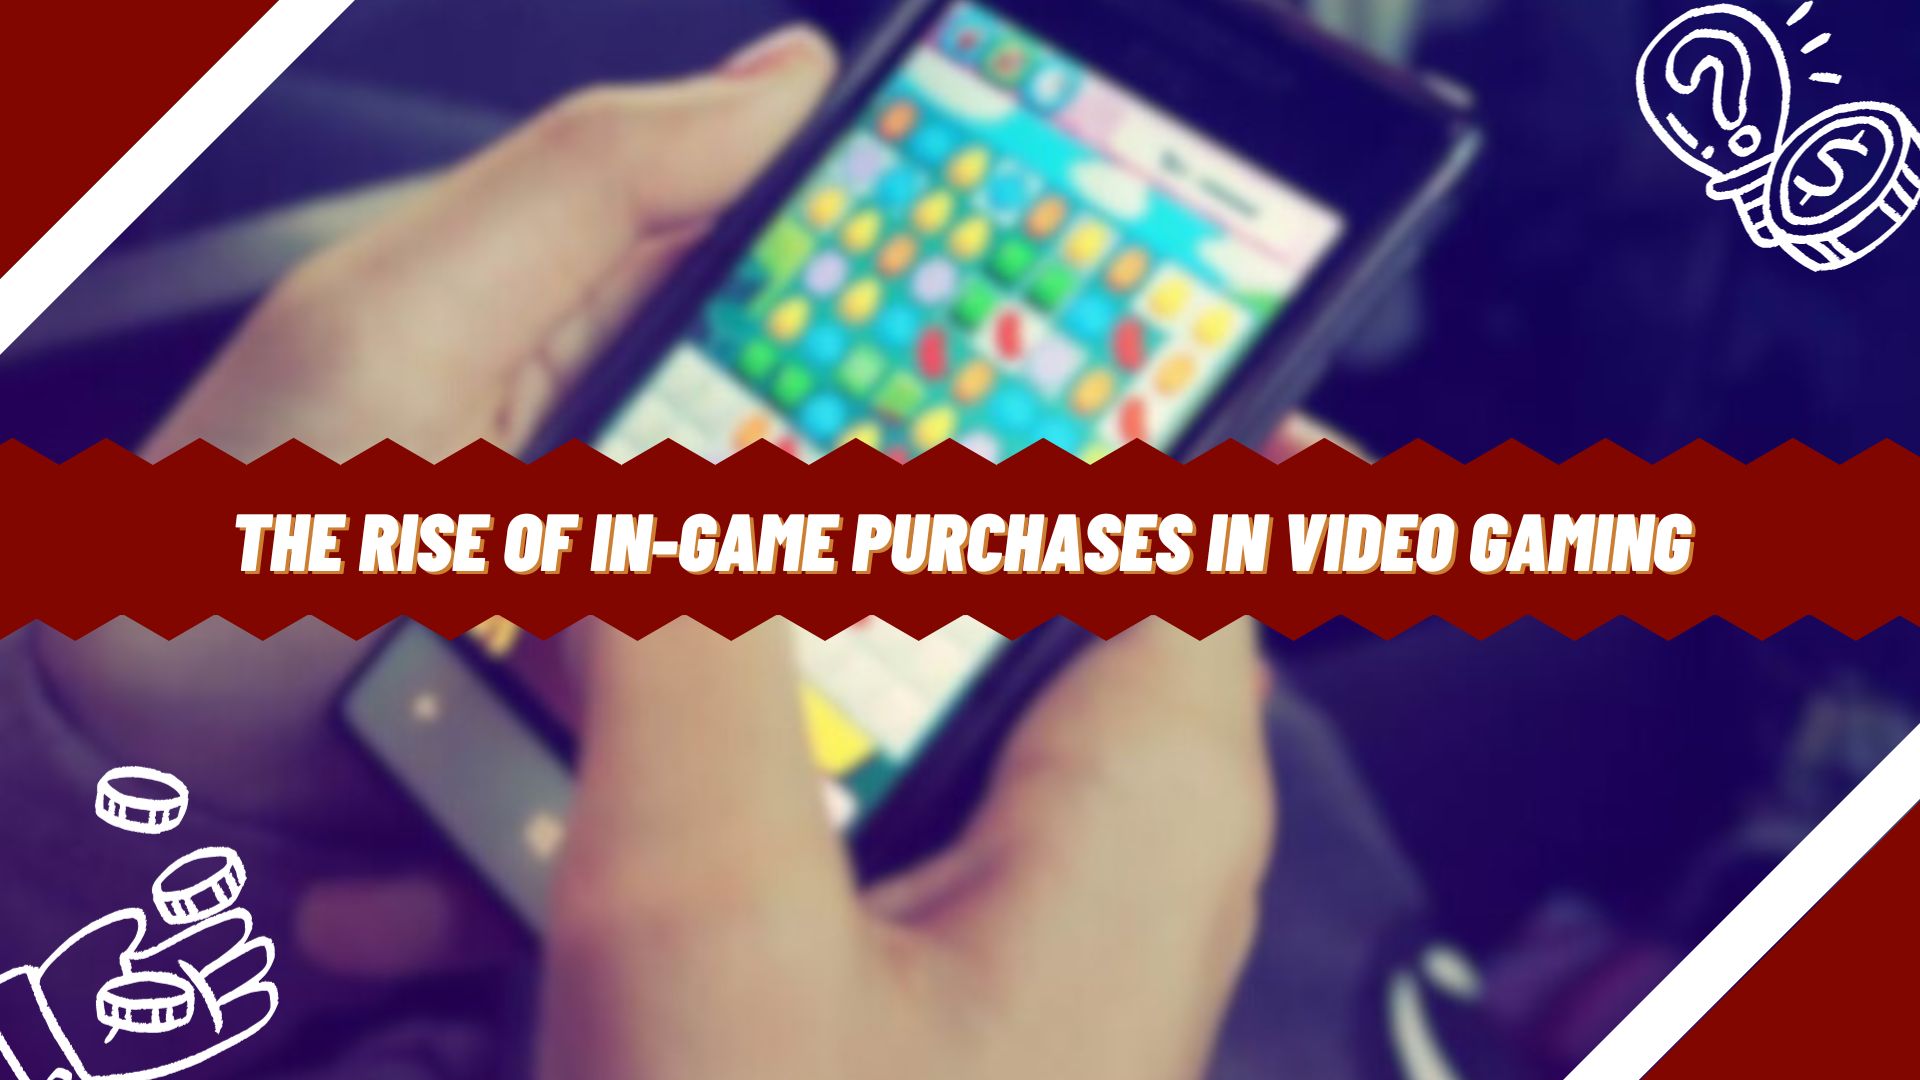 The Rise of In-Game Purchases in Video Gaming